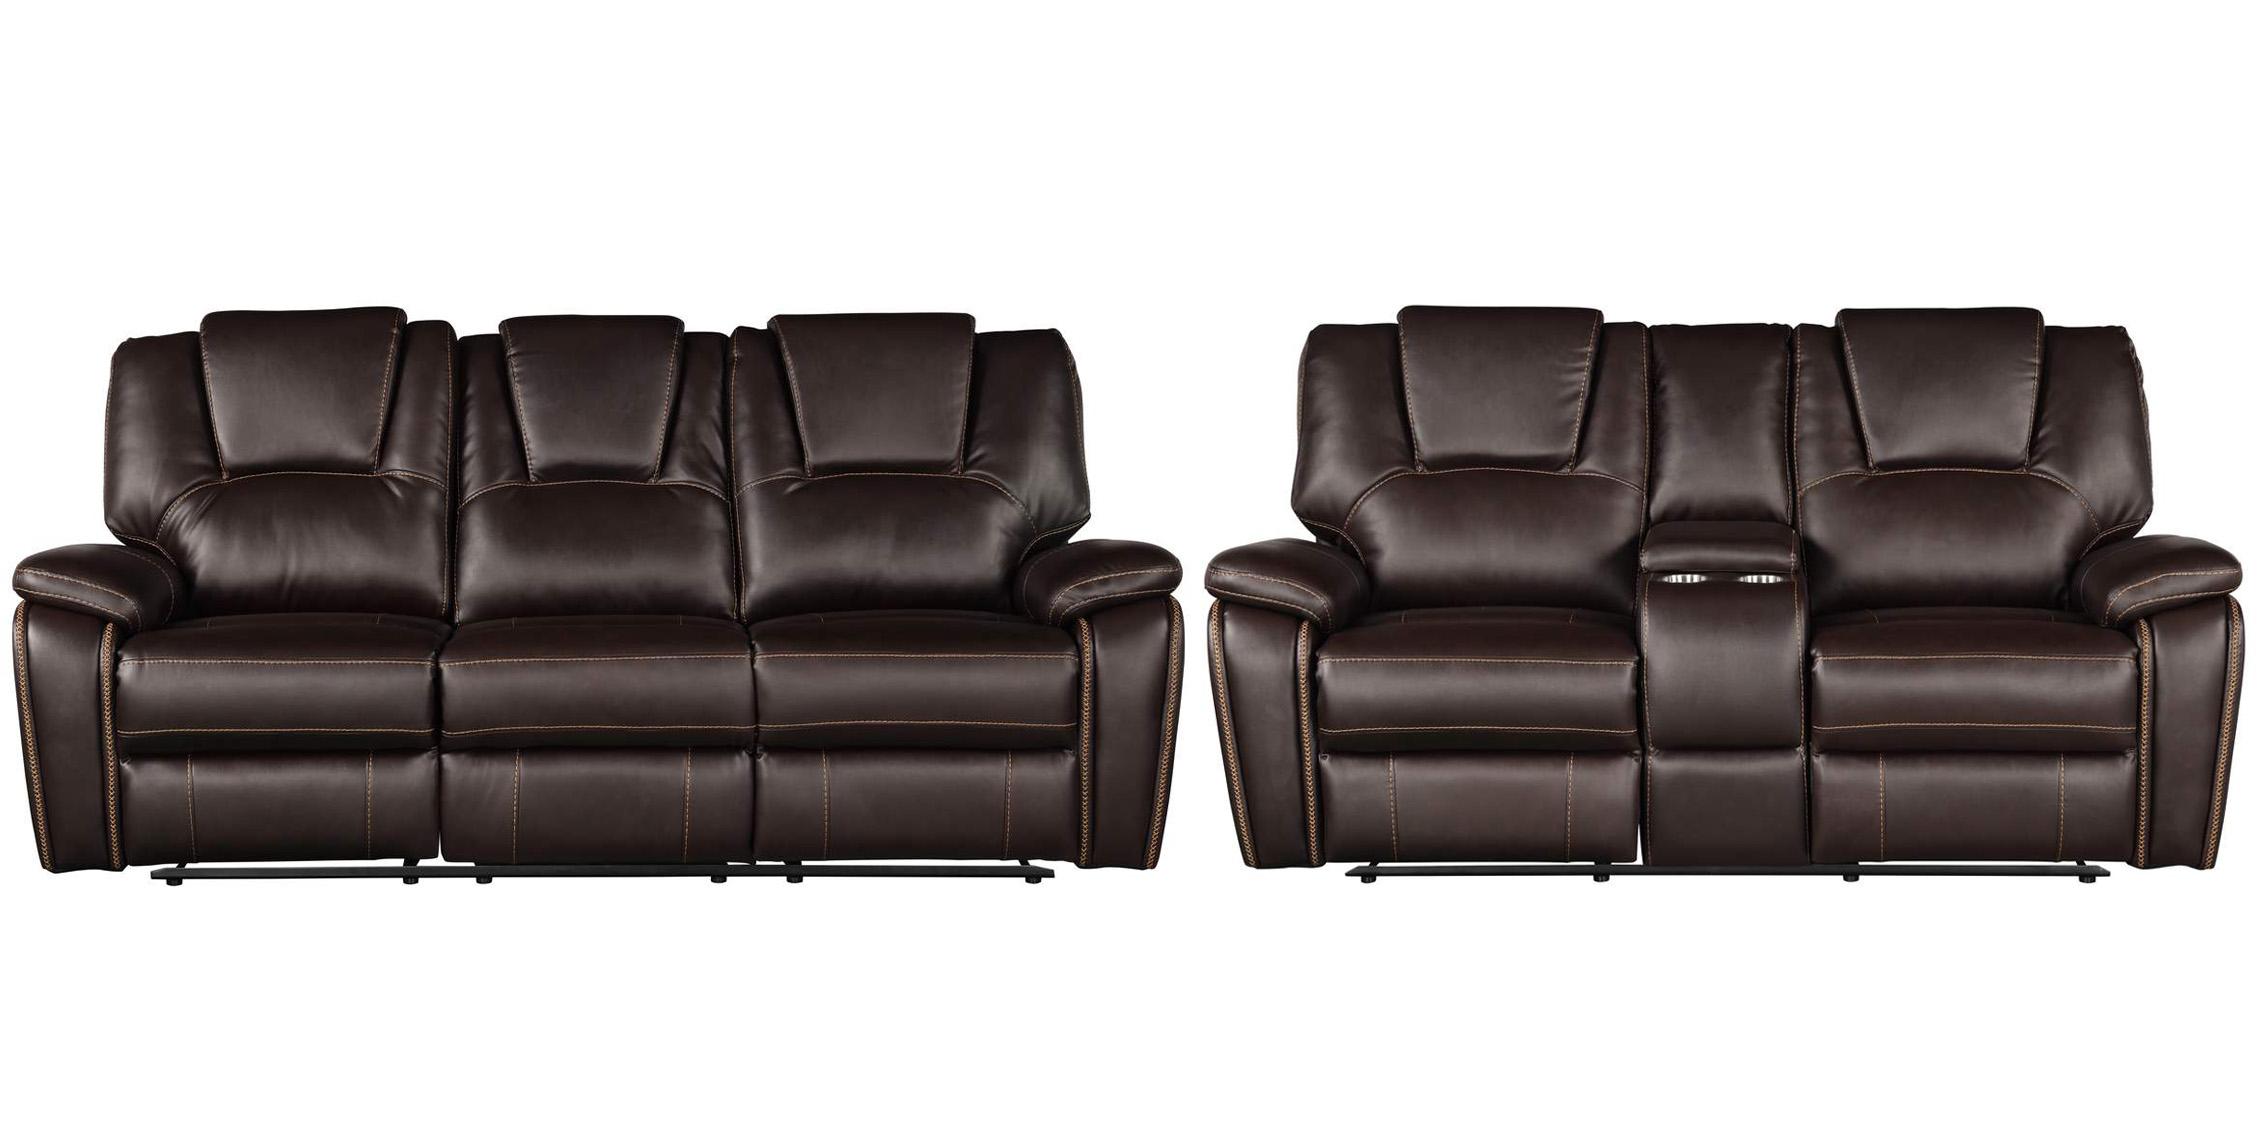 Contemporary, Modern Recliner Sofa Set Hongkong 733569266852 in Brown Eco Leather